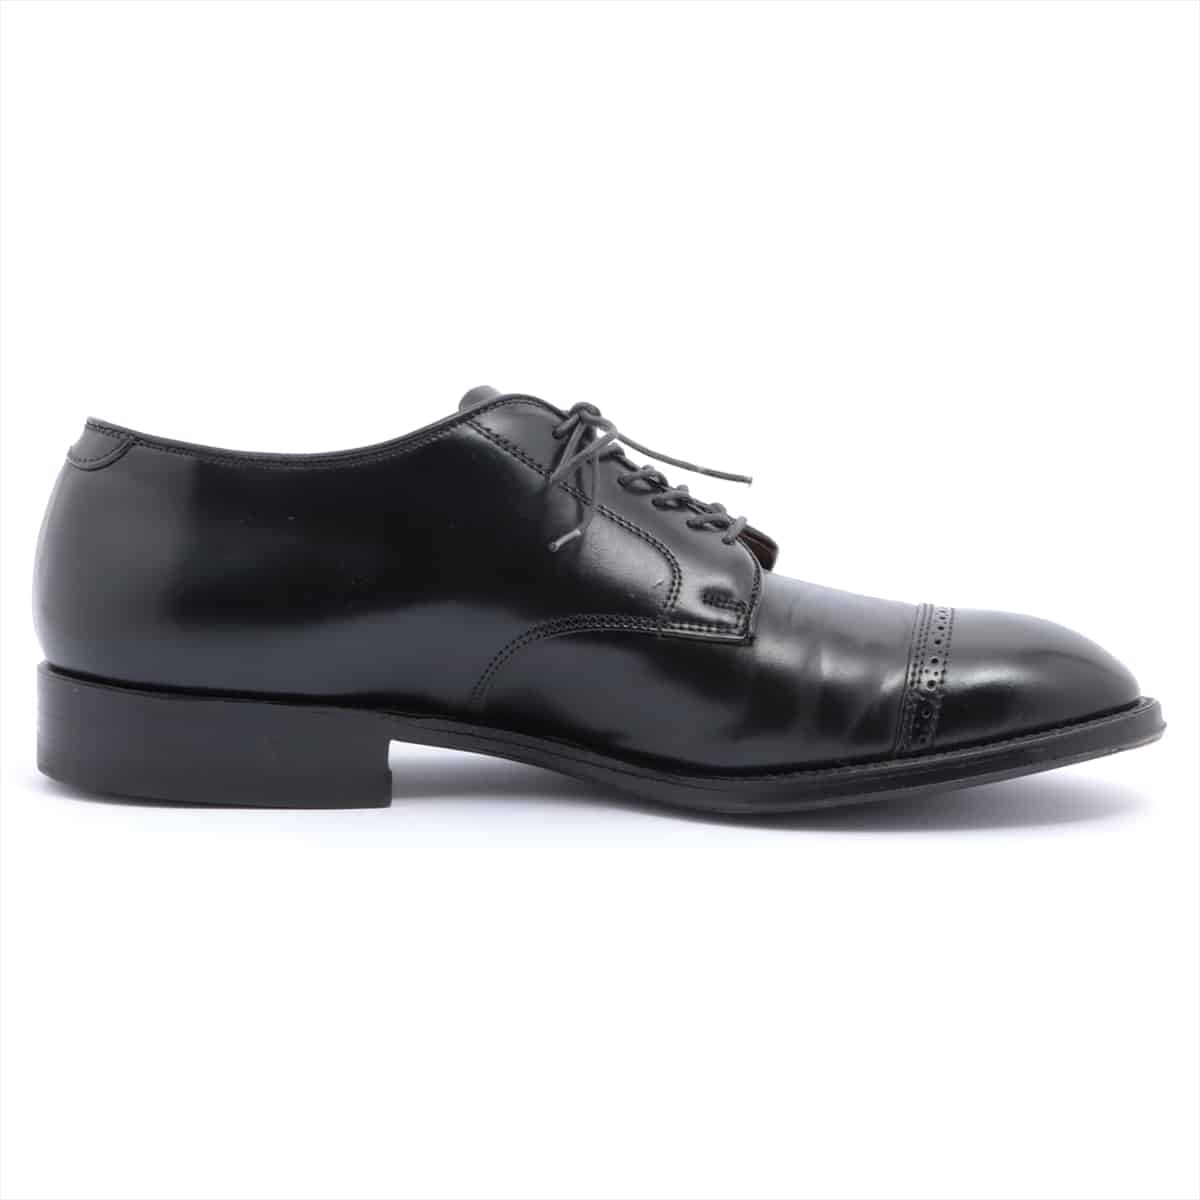 Alden Cordovan Leather shoes 10 1/2 Men's Black punched cap toe 56251 With genuine shoe tree